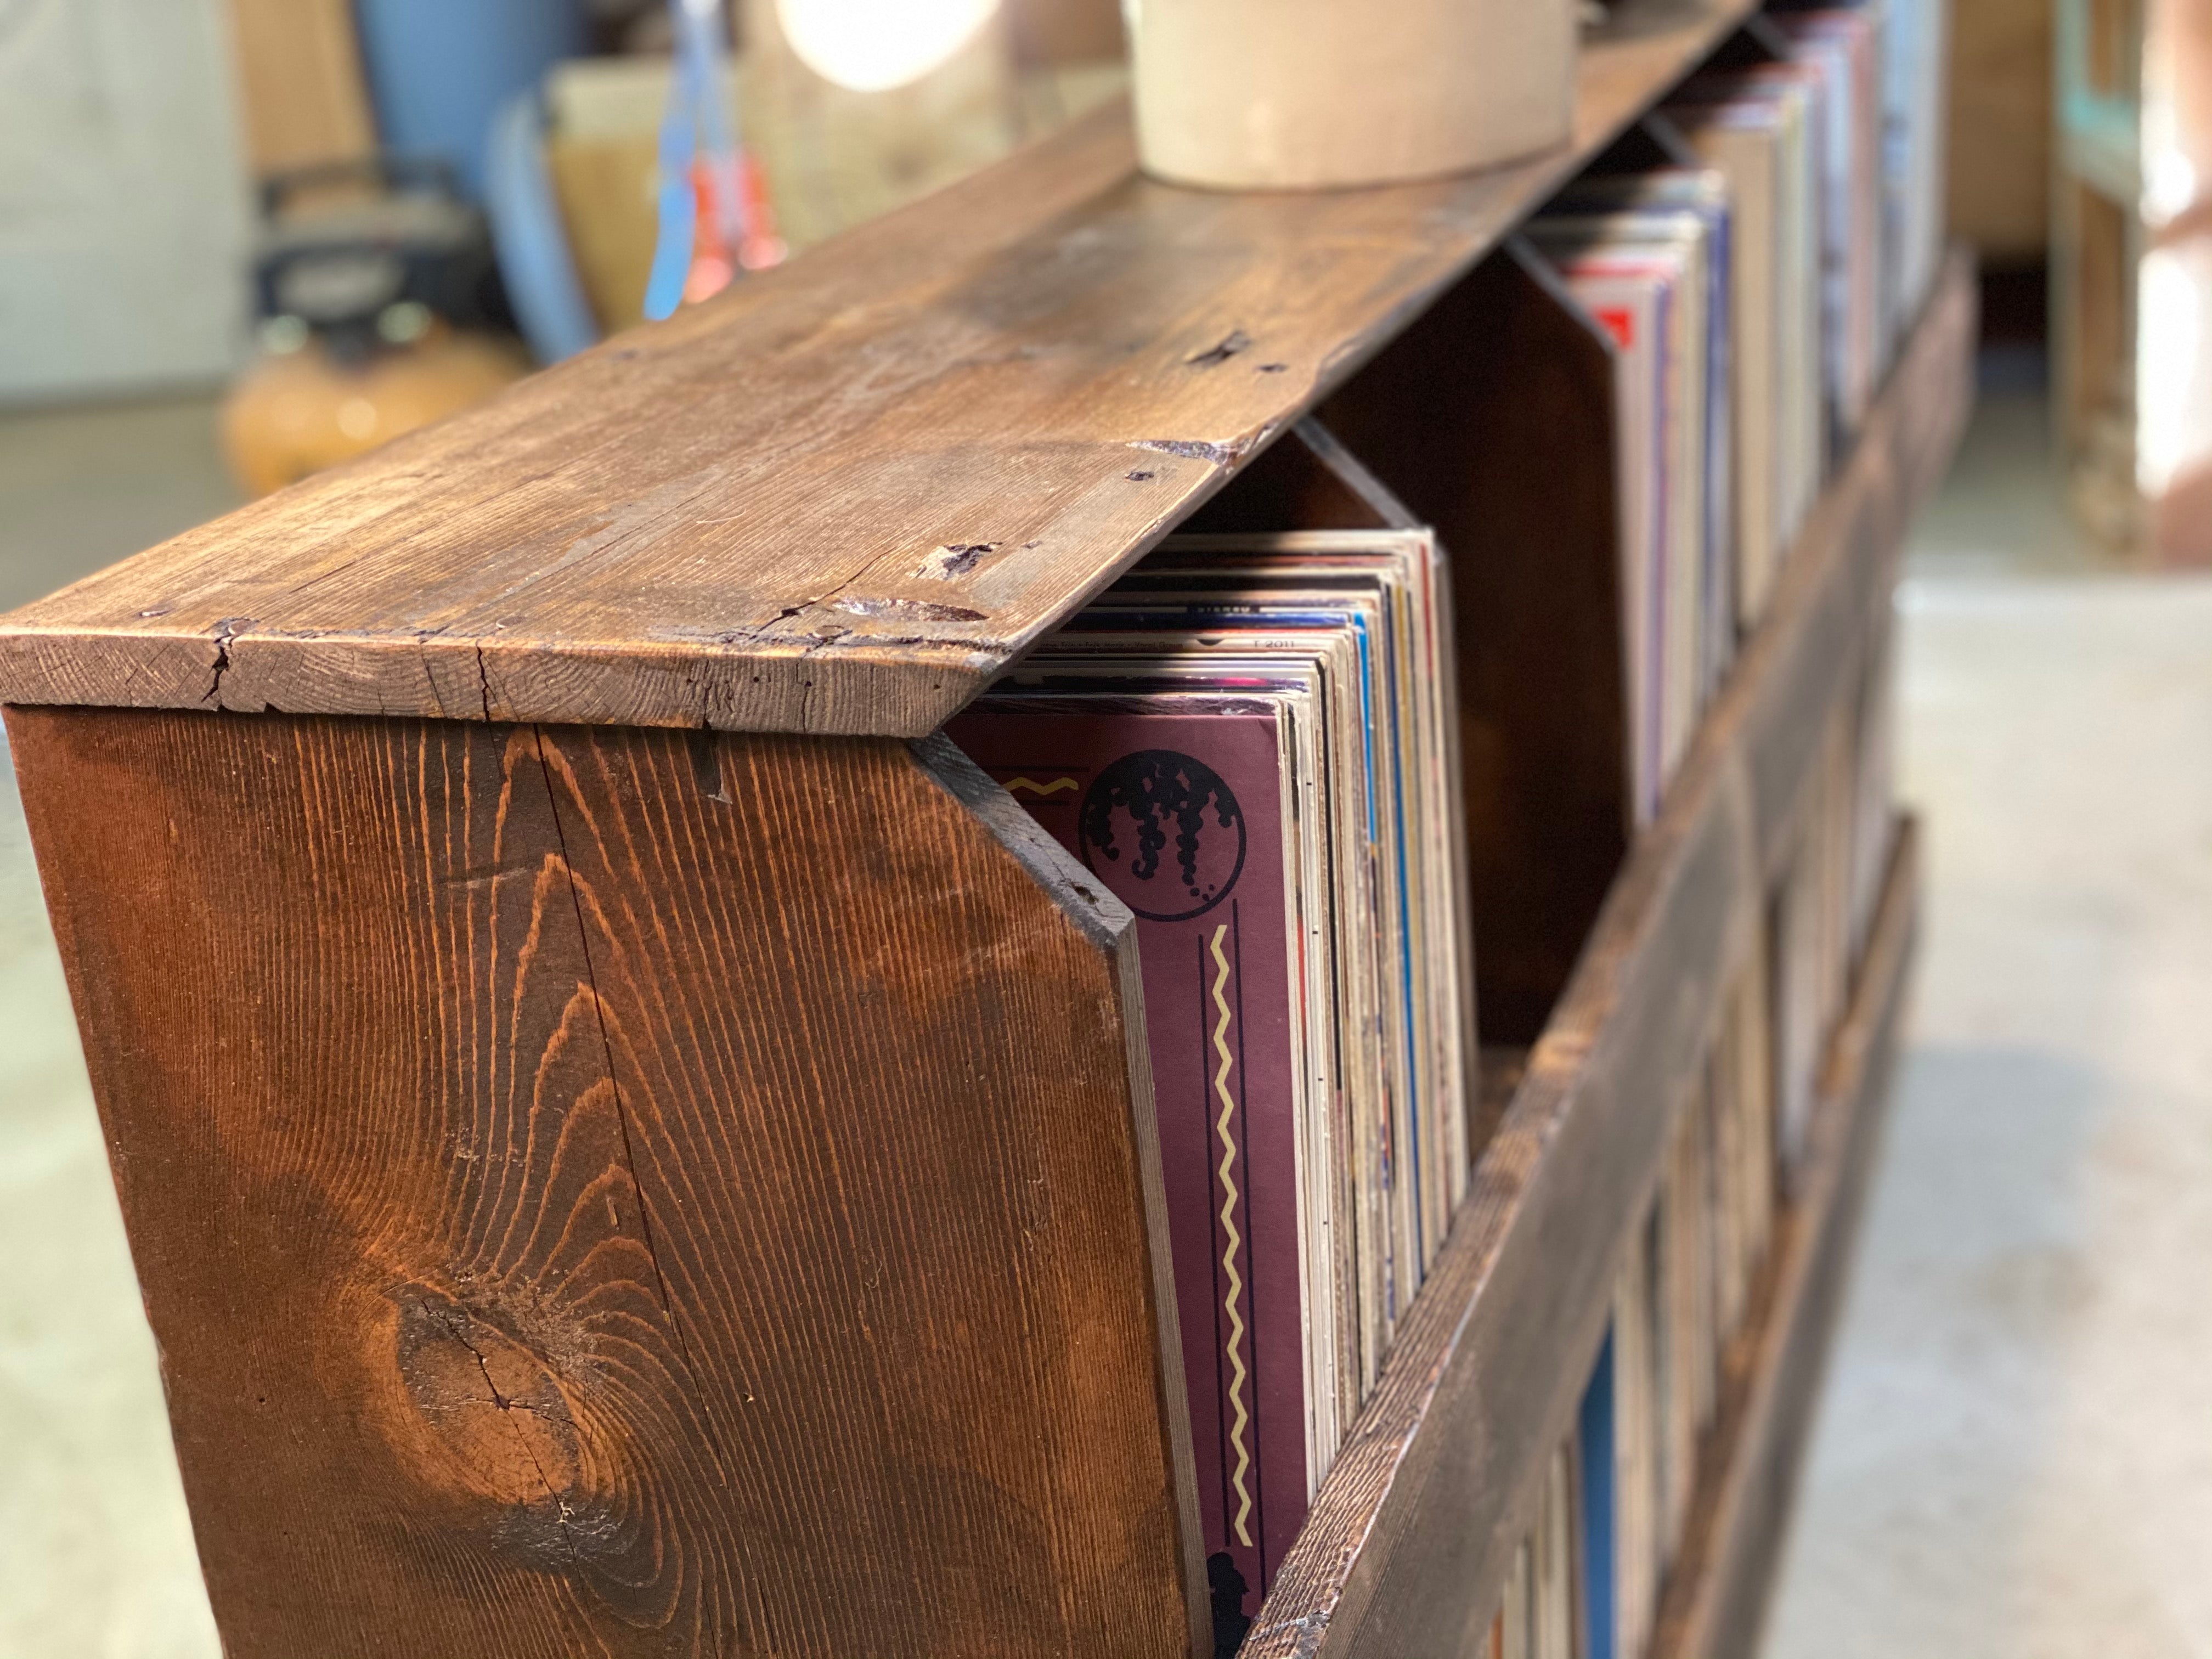 Record Credenza | Shelf | Reclaimed Chicken Roost